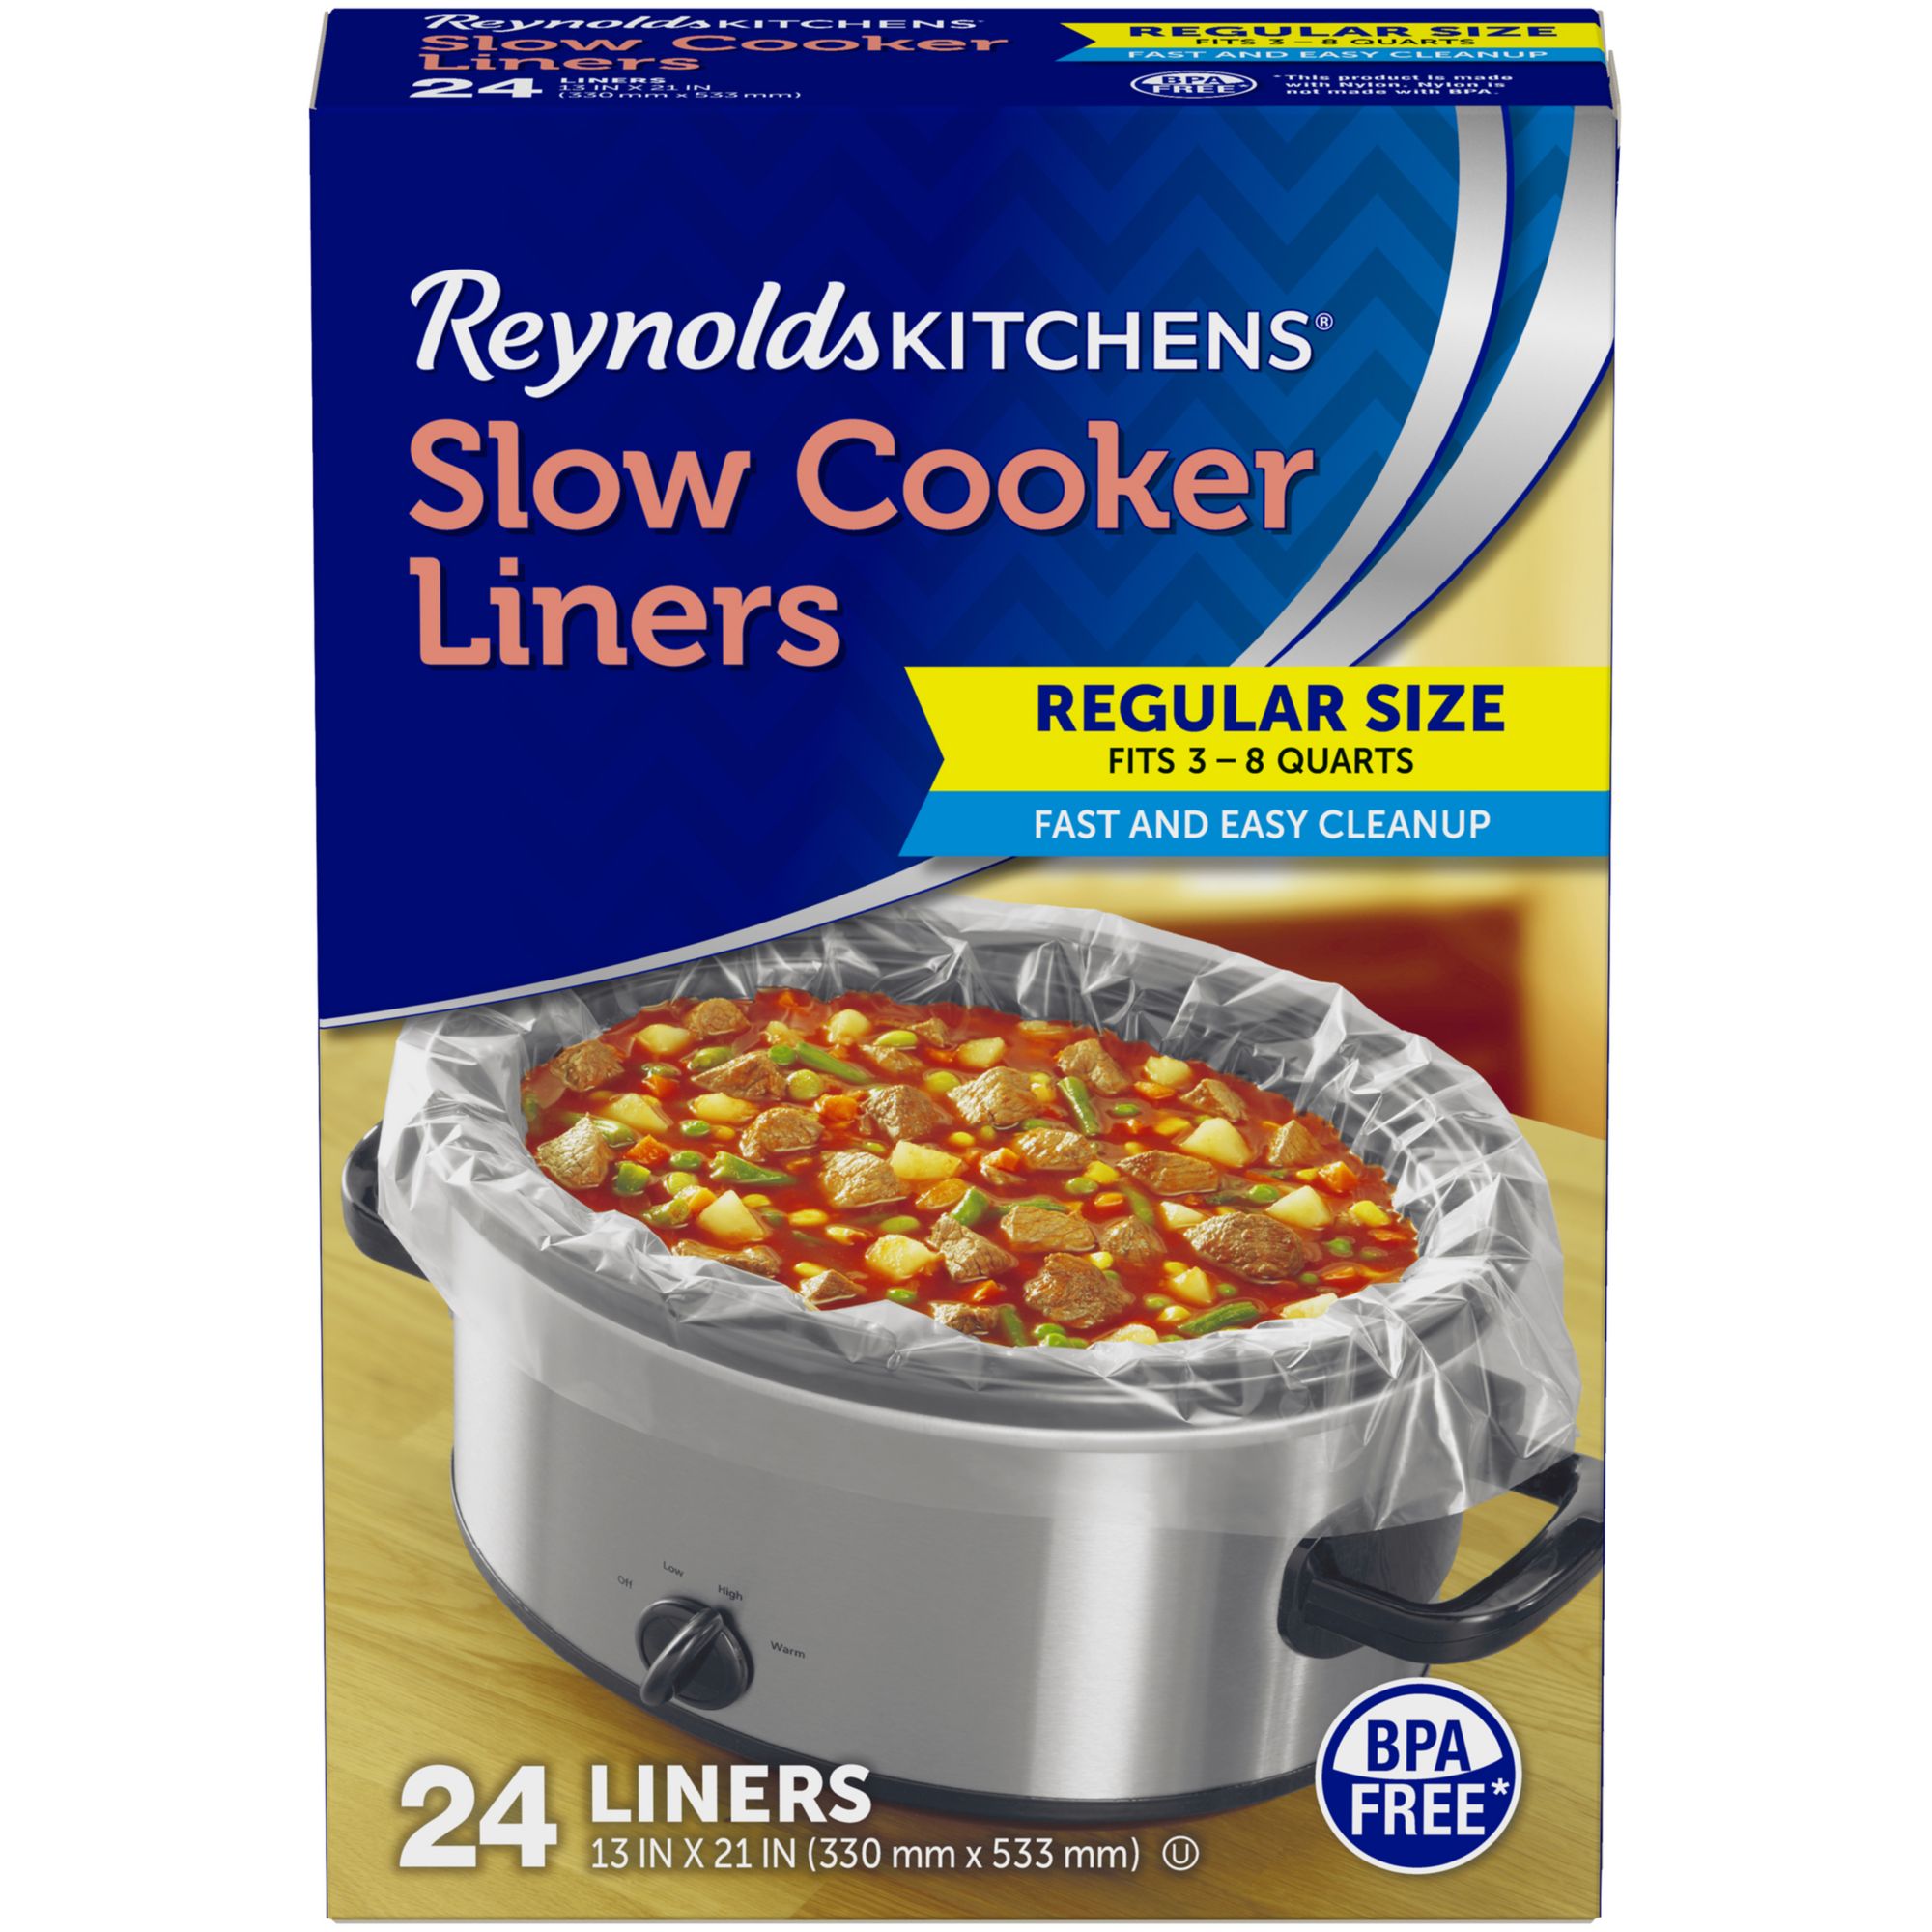 Slow Cooker Liners - War Eagle Mill Food Group